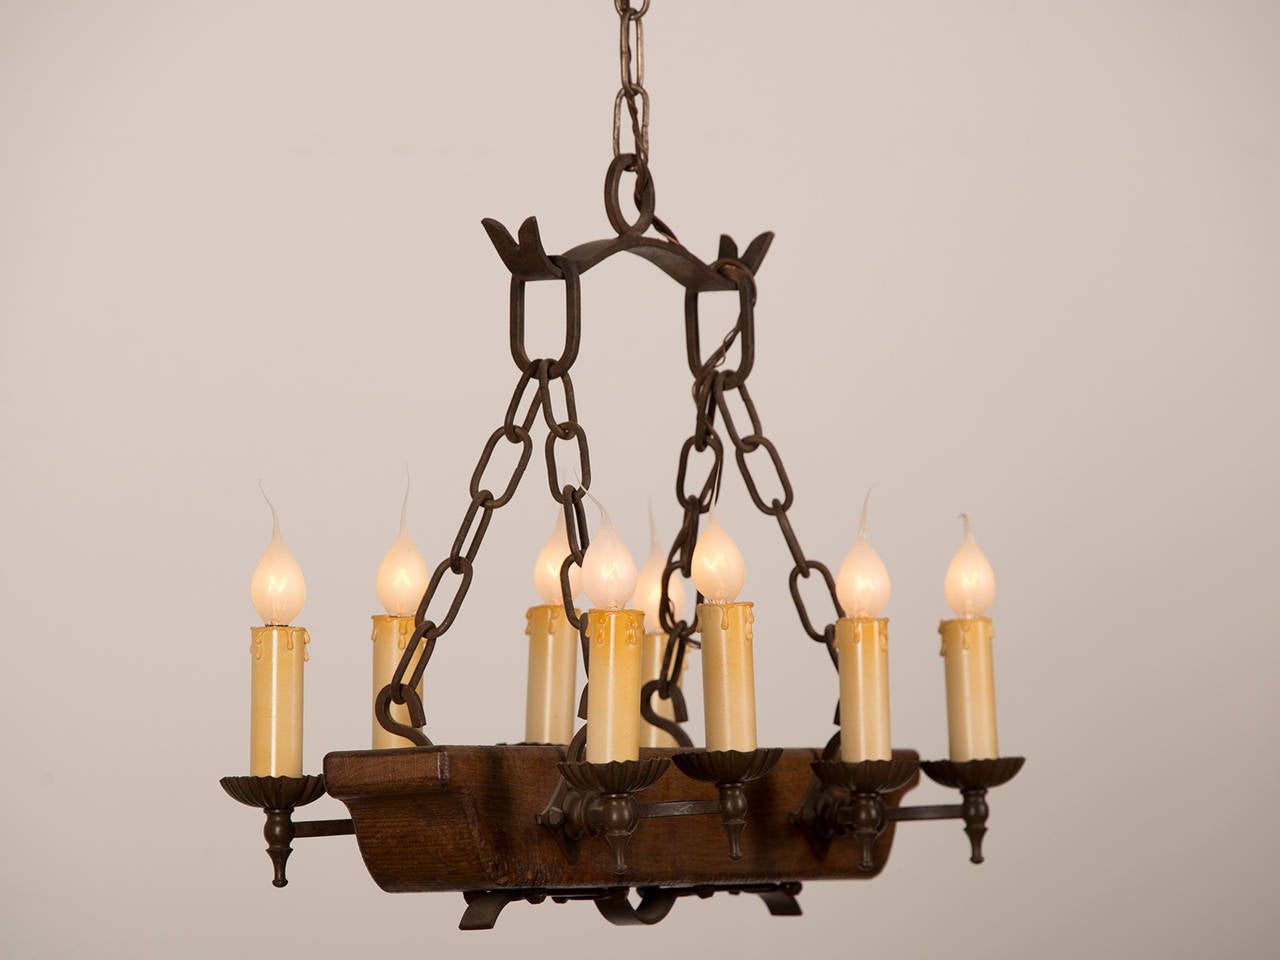 Receive our new selections direct from 1stdibs by email each week. Please click Follow Dealer below and see them first!

A vintage French eight-light wooden beam chandelier circa 1940 having substantial ironwork.